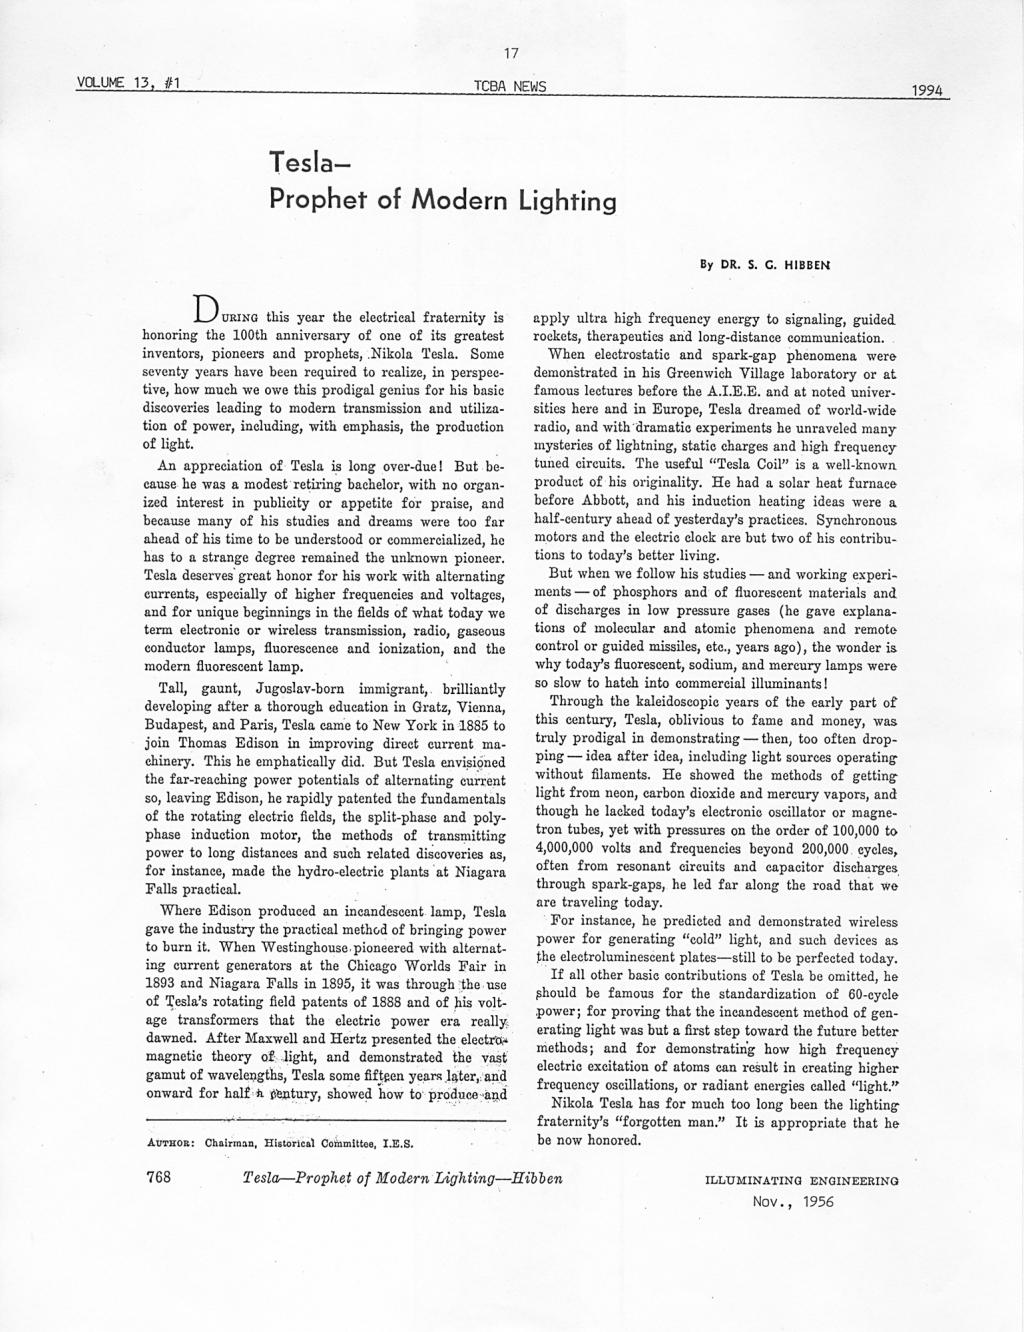 TCBA Volume 13 - Issue 1 - Page 17 of 18